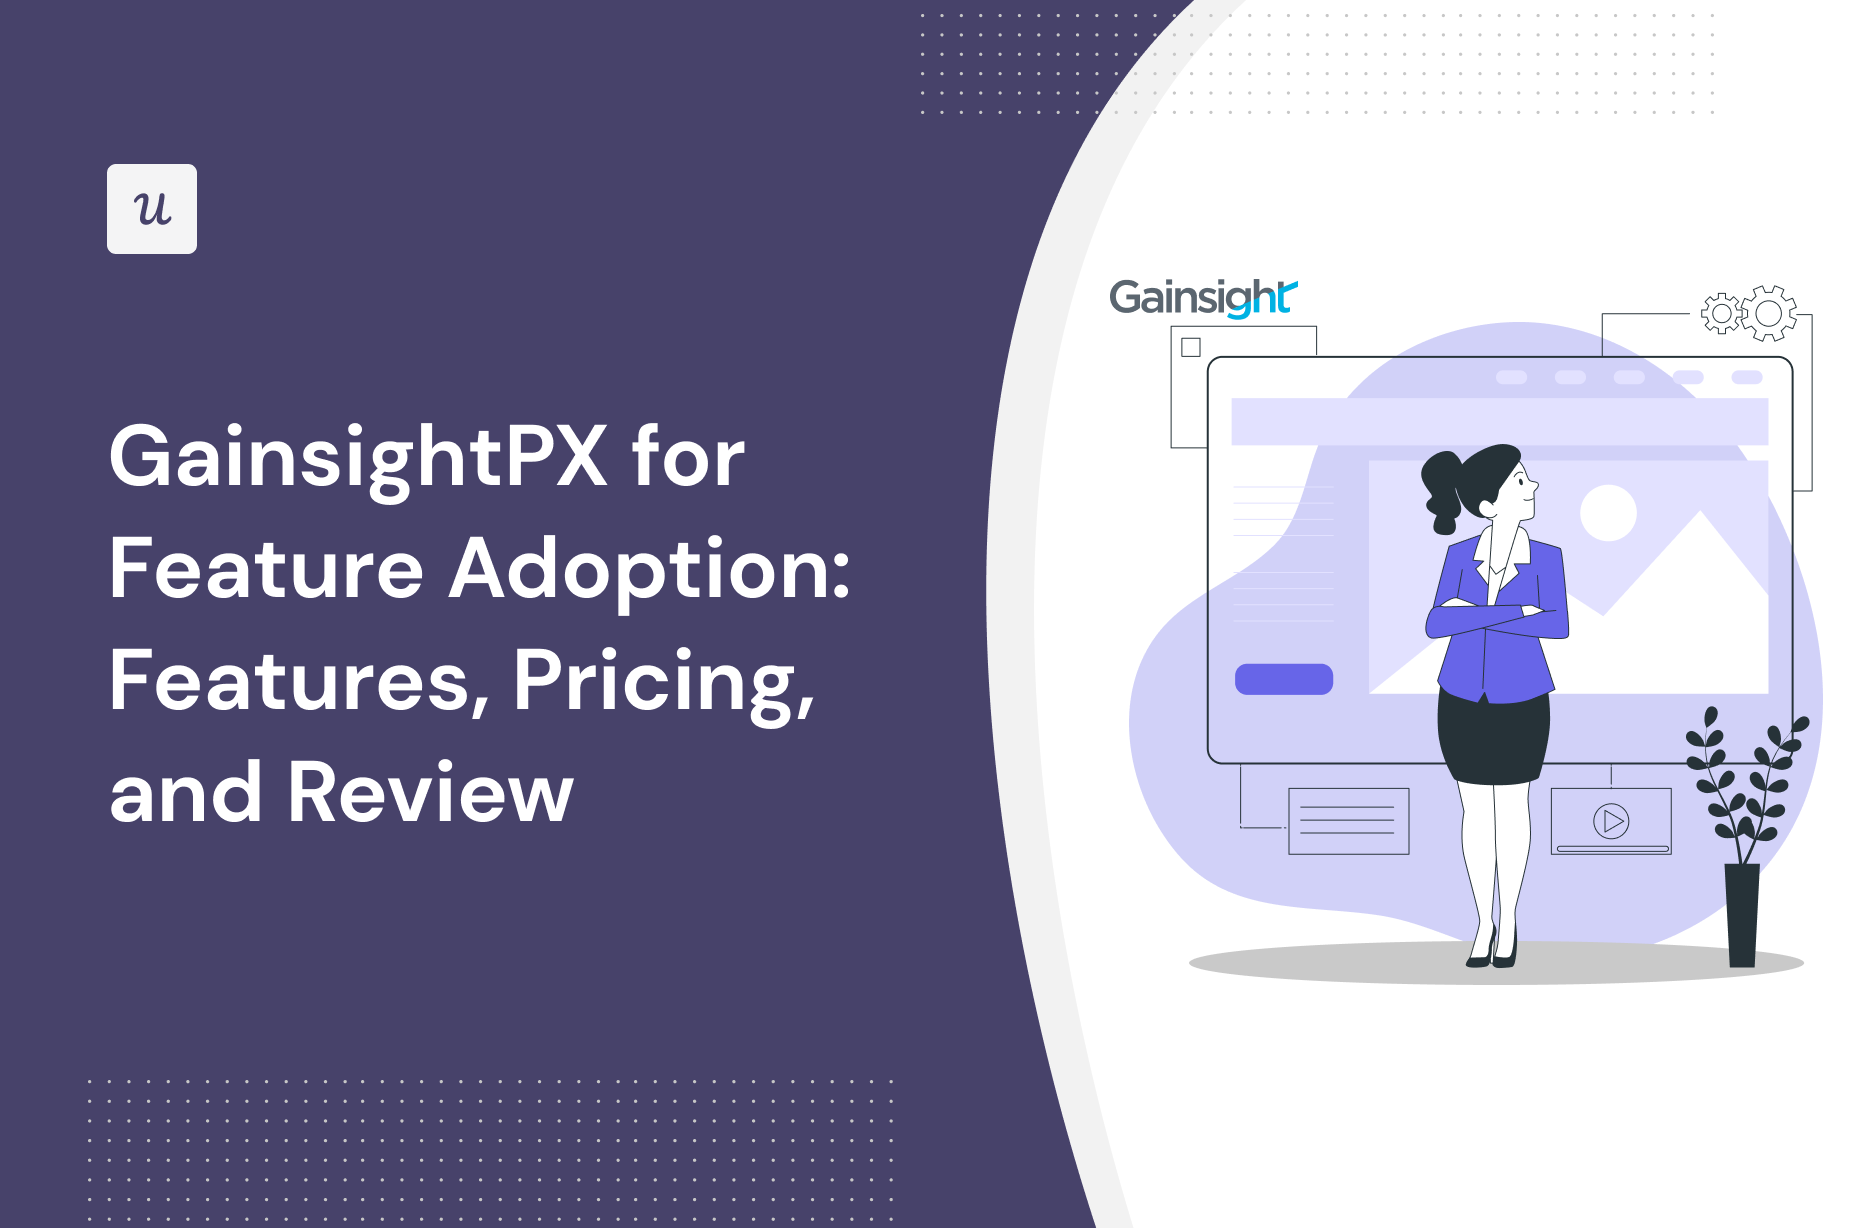 GainsightPX for Feature Adoption: Features, Pricing, and Review